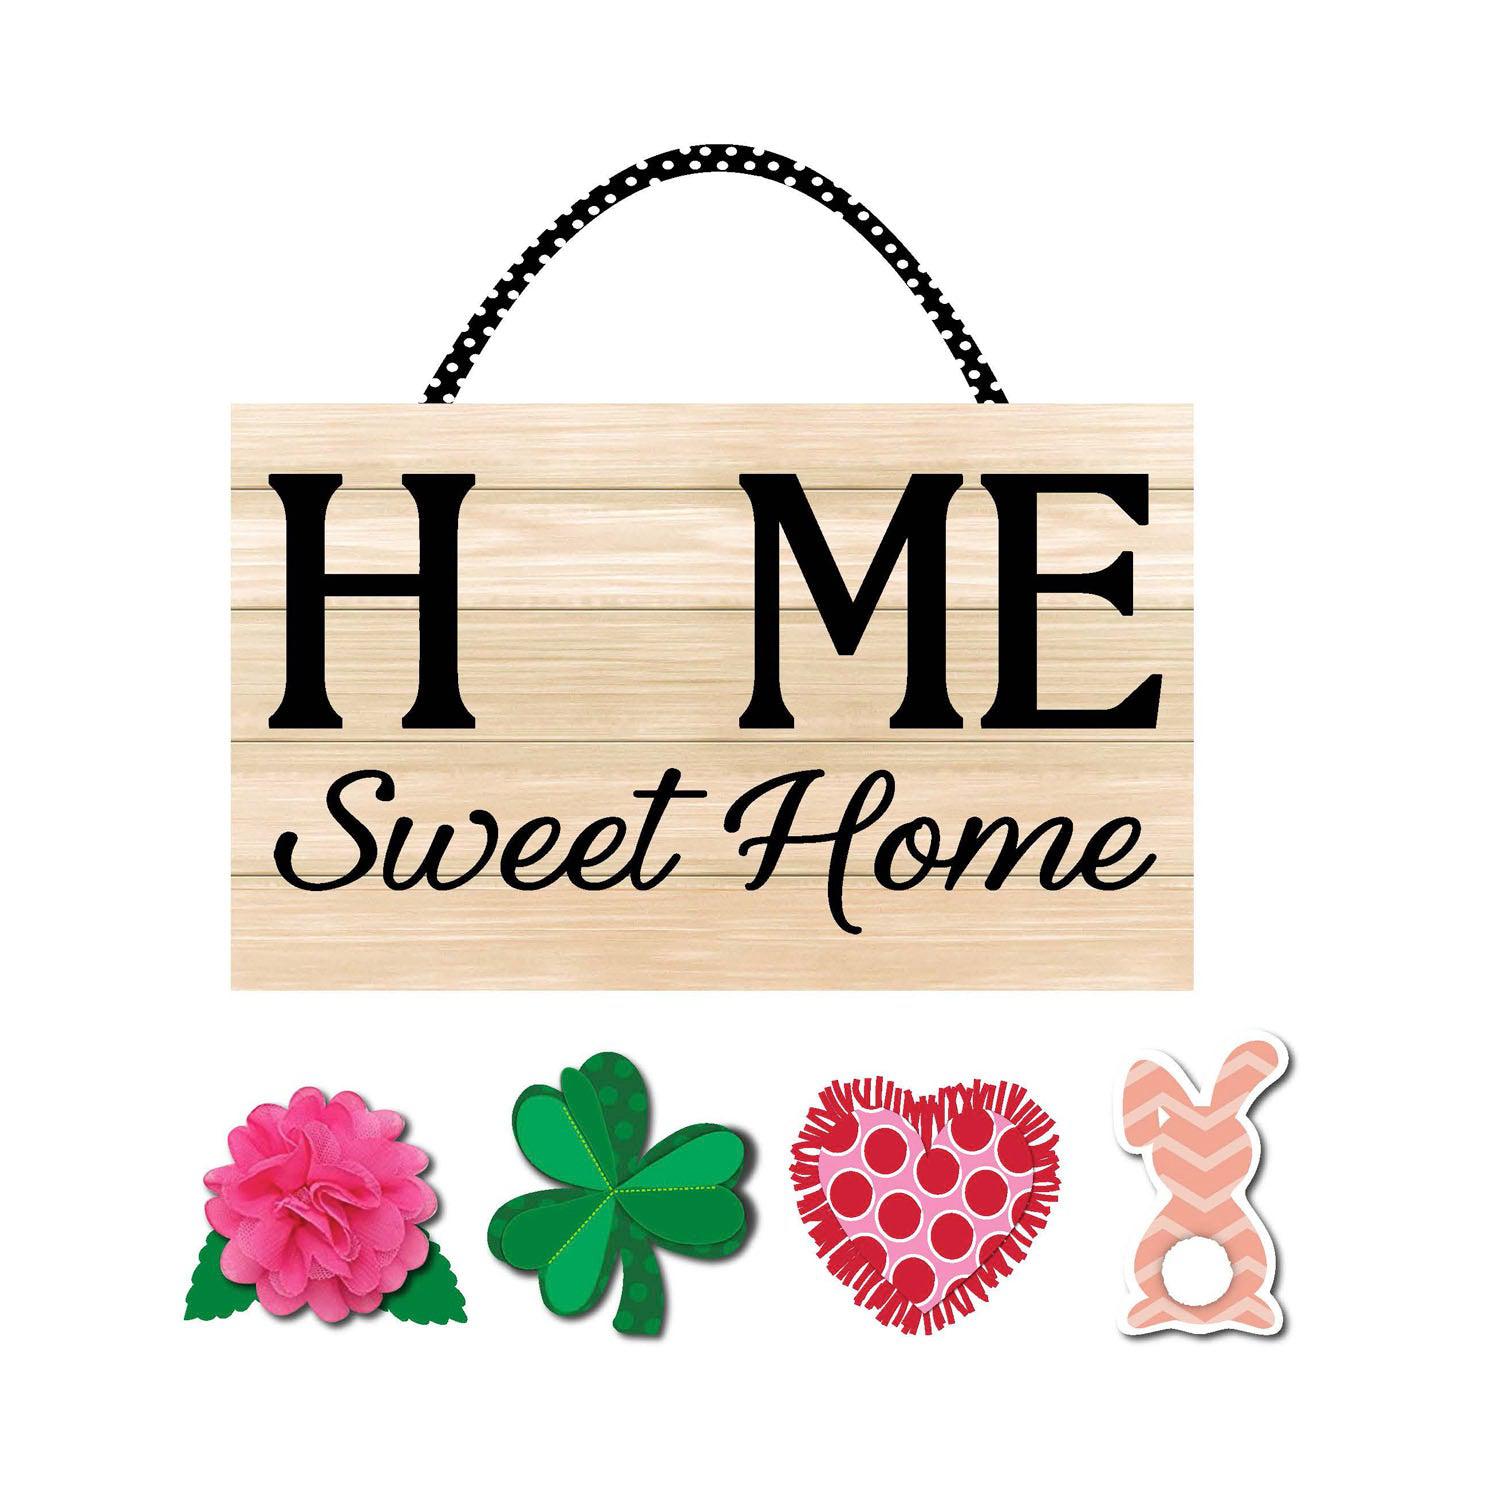 The Spring Home Sweet Home Interchangeable Door Décor lasts all spring long by simply switching out the pinned on heart, shamrock, bunny, and flower.